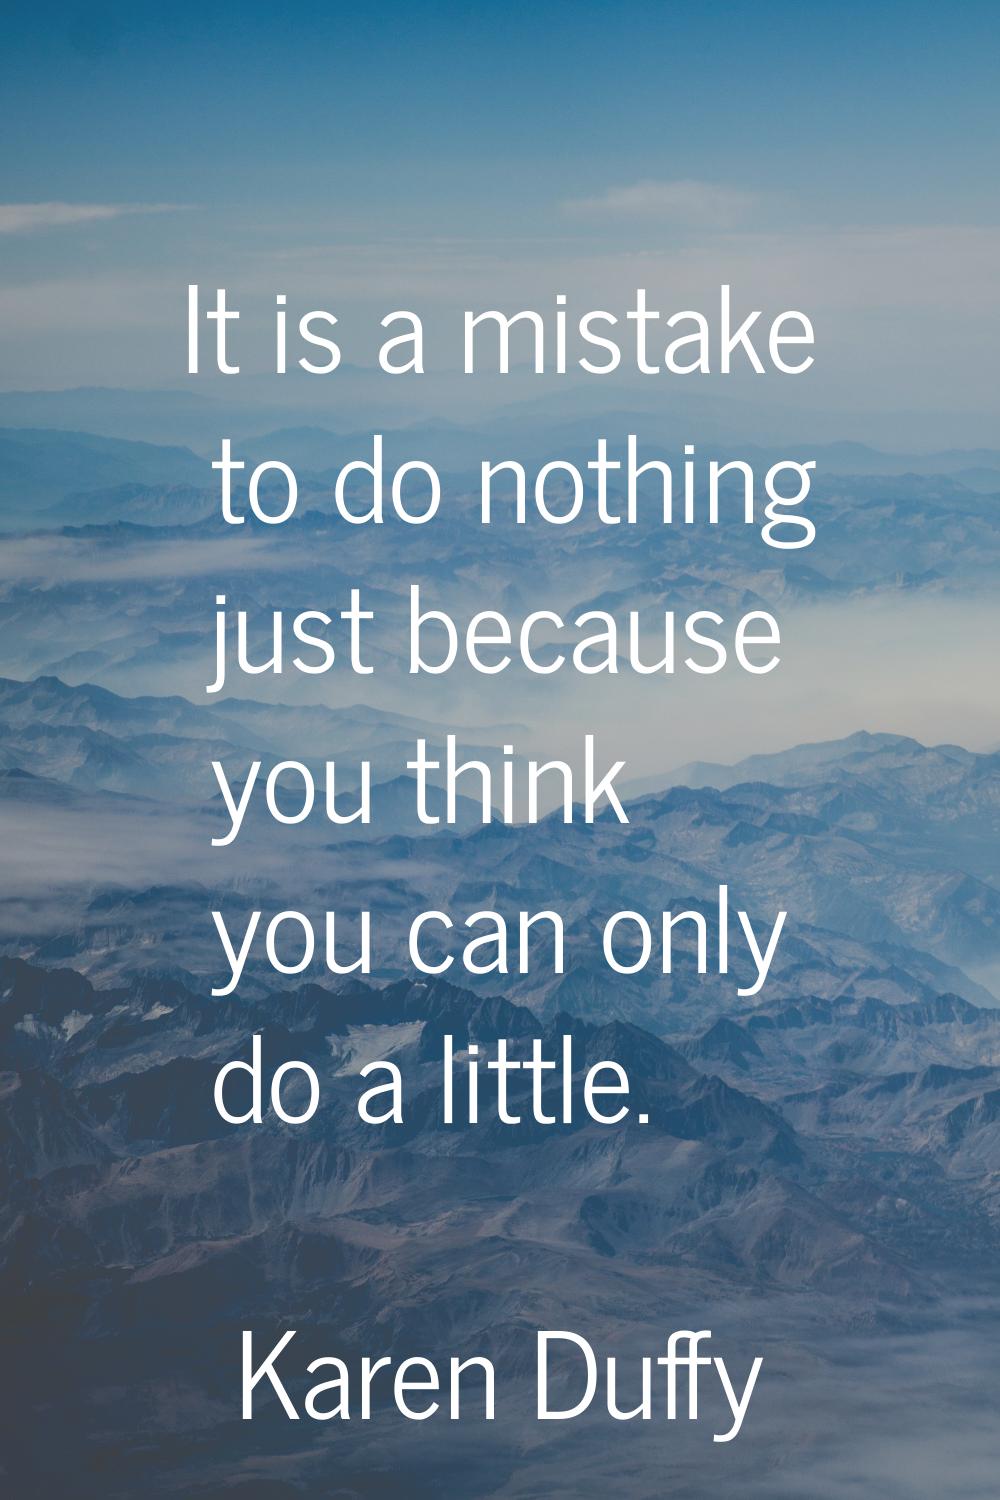 It is a mistake to do nothing just because you think you can only do a little.